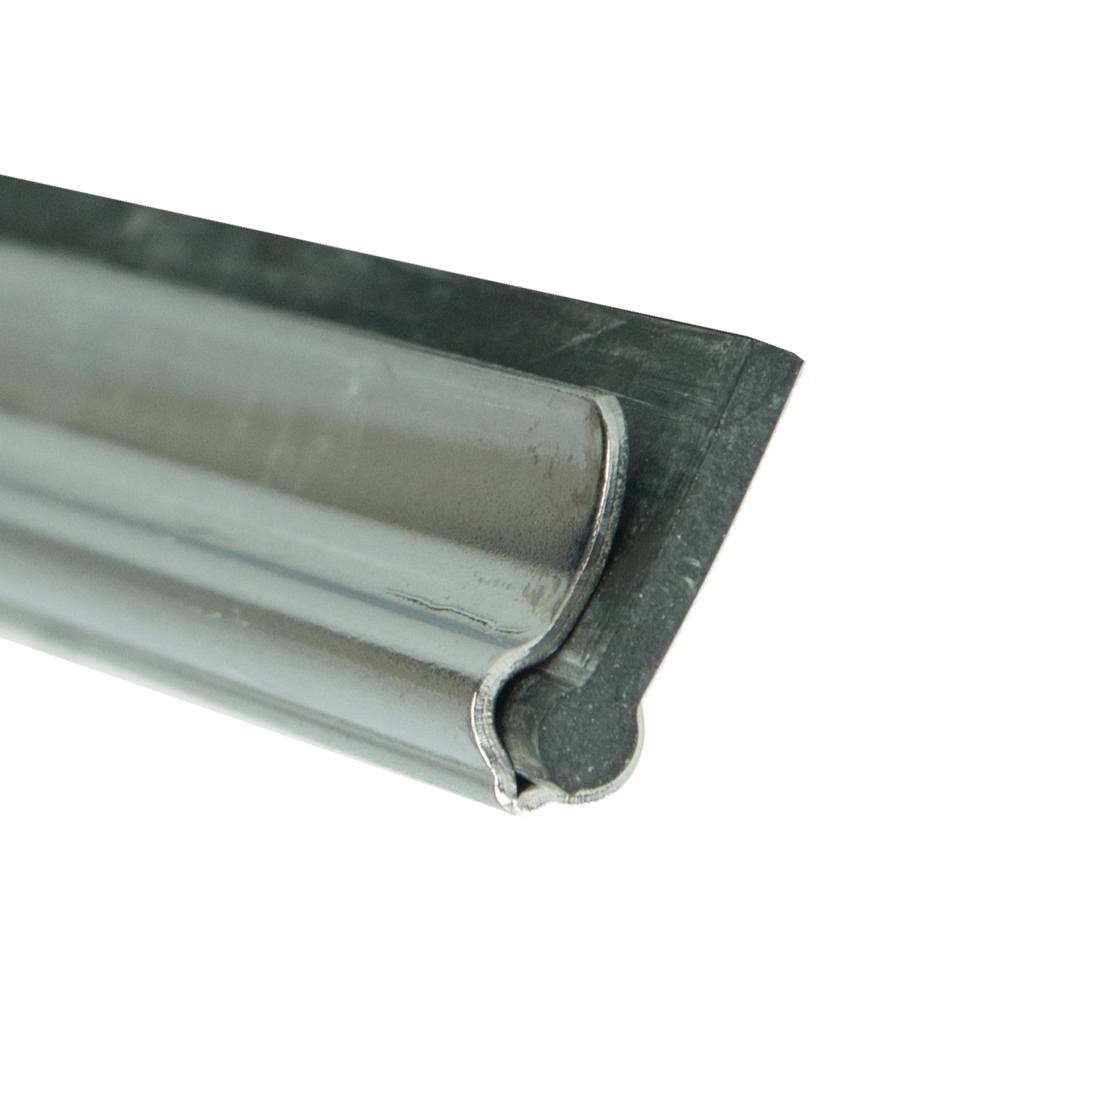 Pulex Stainless Steel Squeegee Channel Rubber View